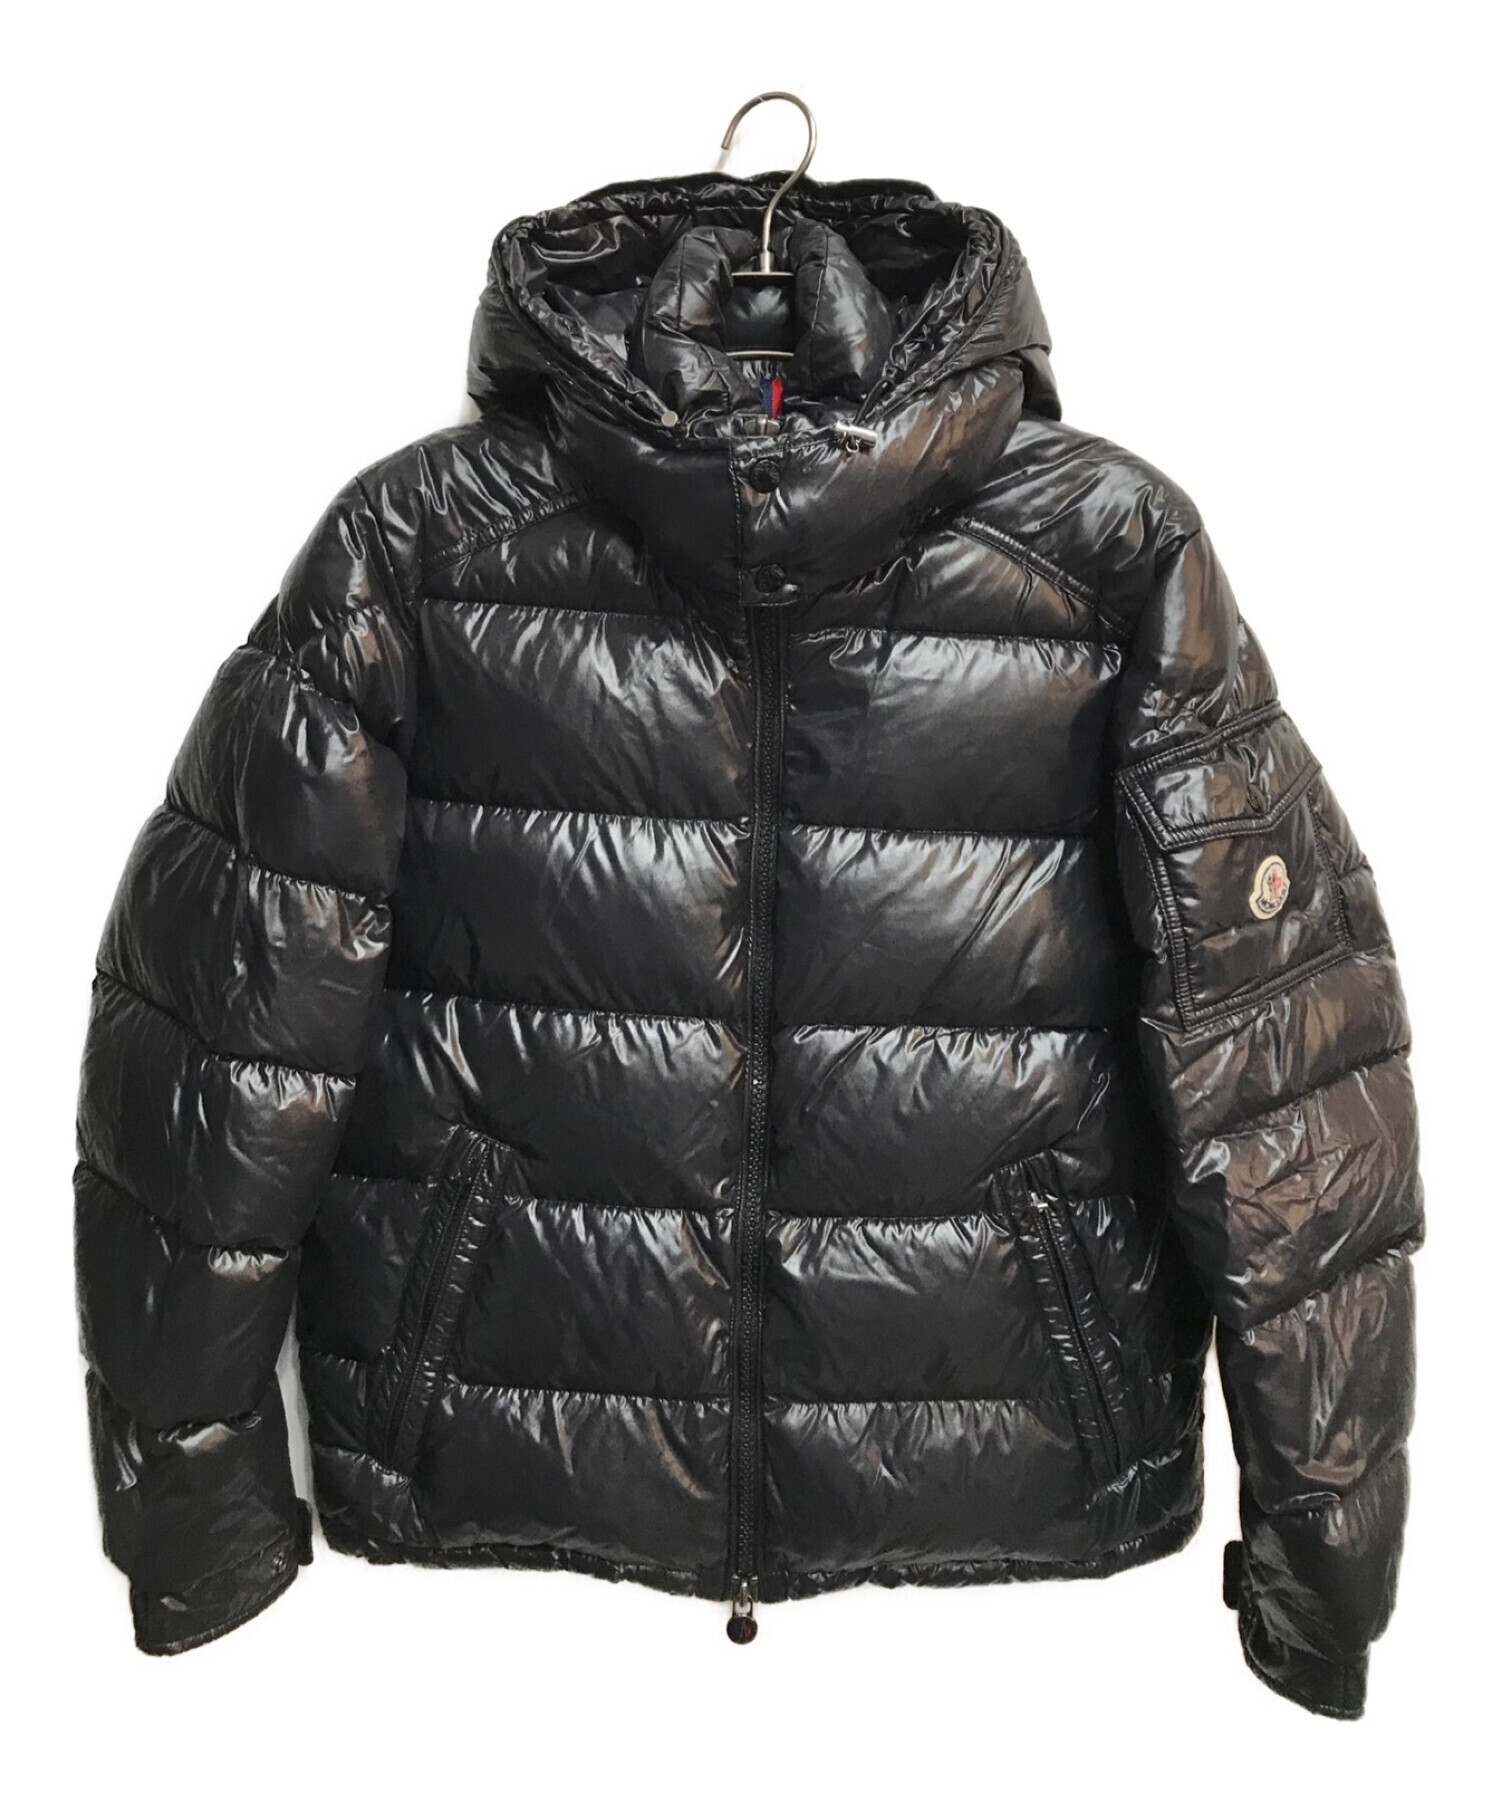 MONCLER HYMALAY GIUBBOTTO | www.innoveering.net